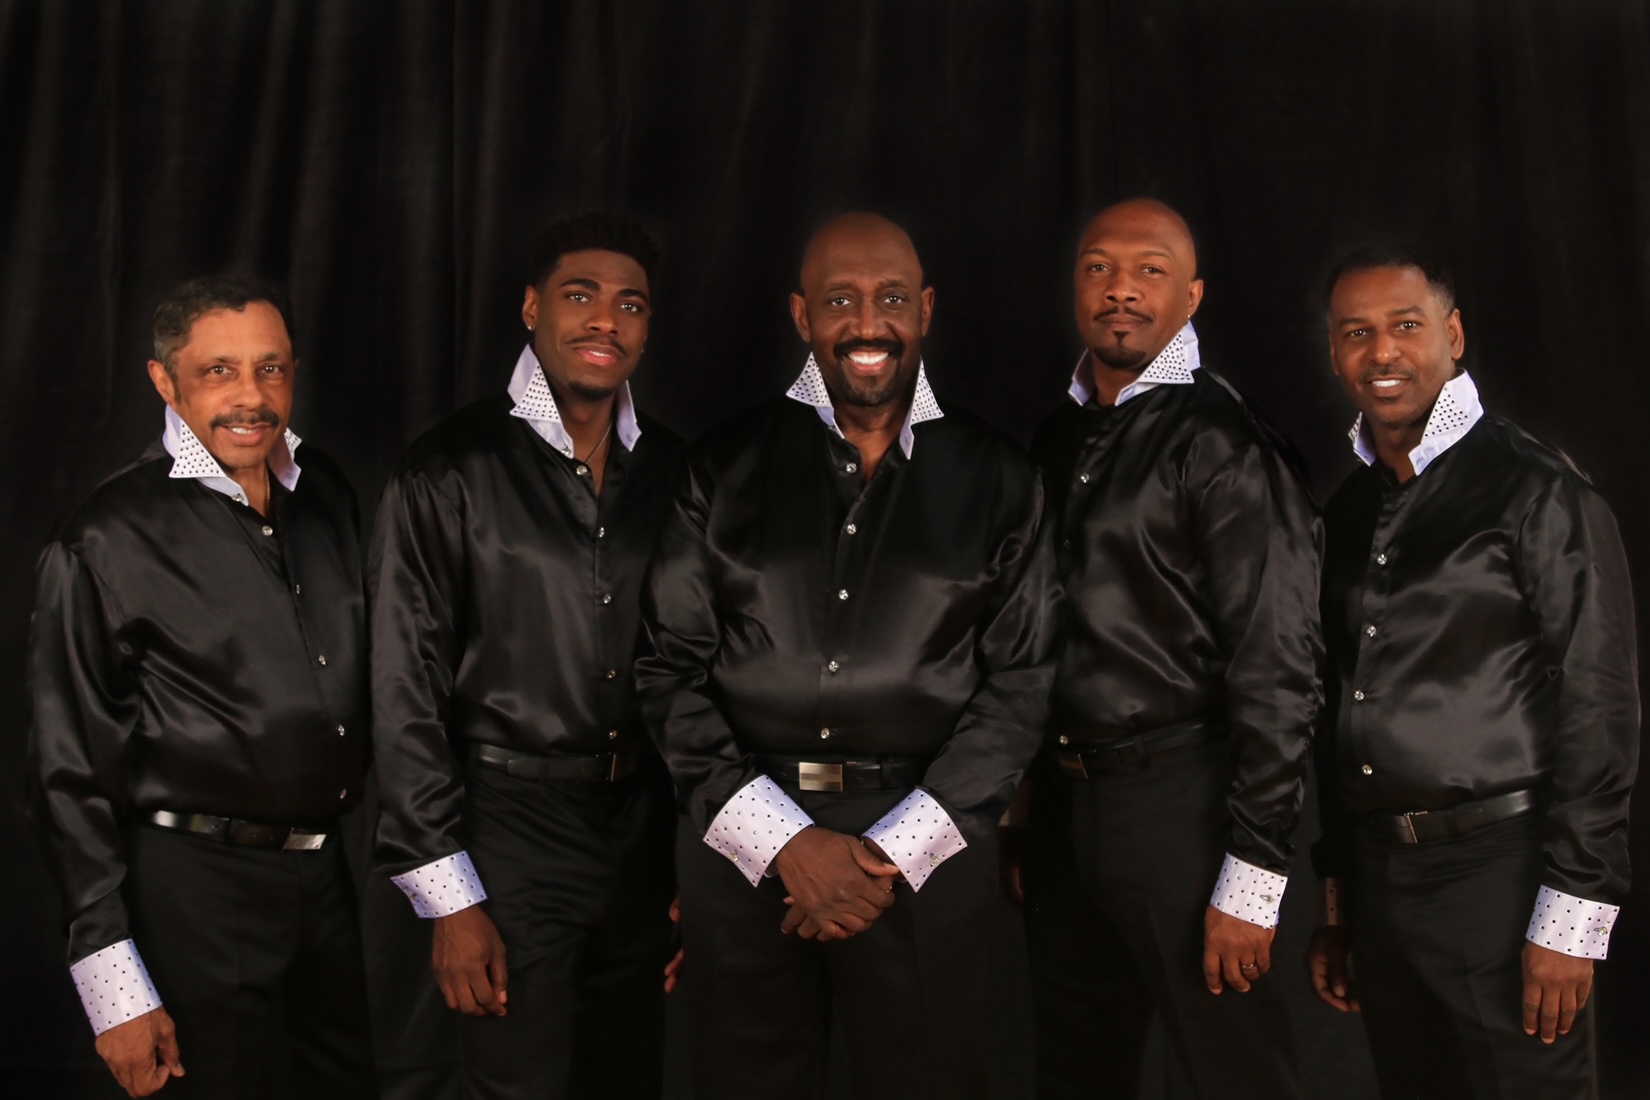 The 5 musicians of Temptations in front of black background, they wear black satin shirts with white collars and cuffs